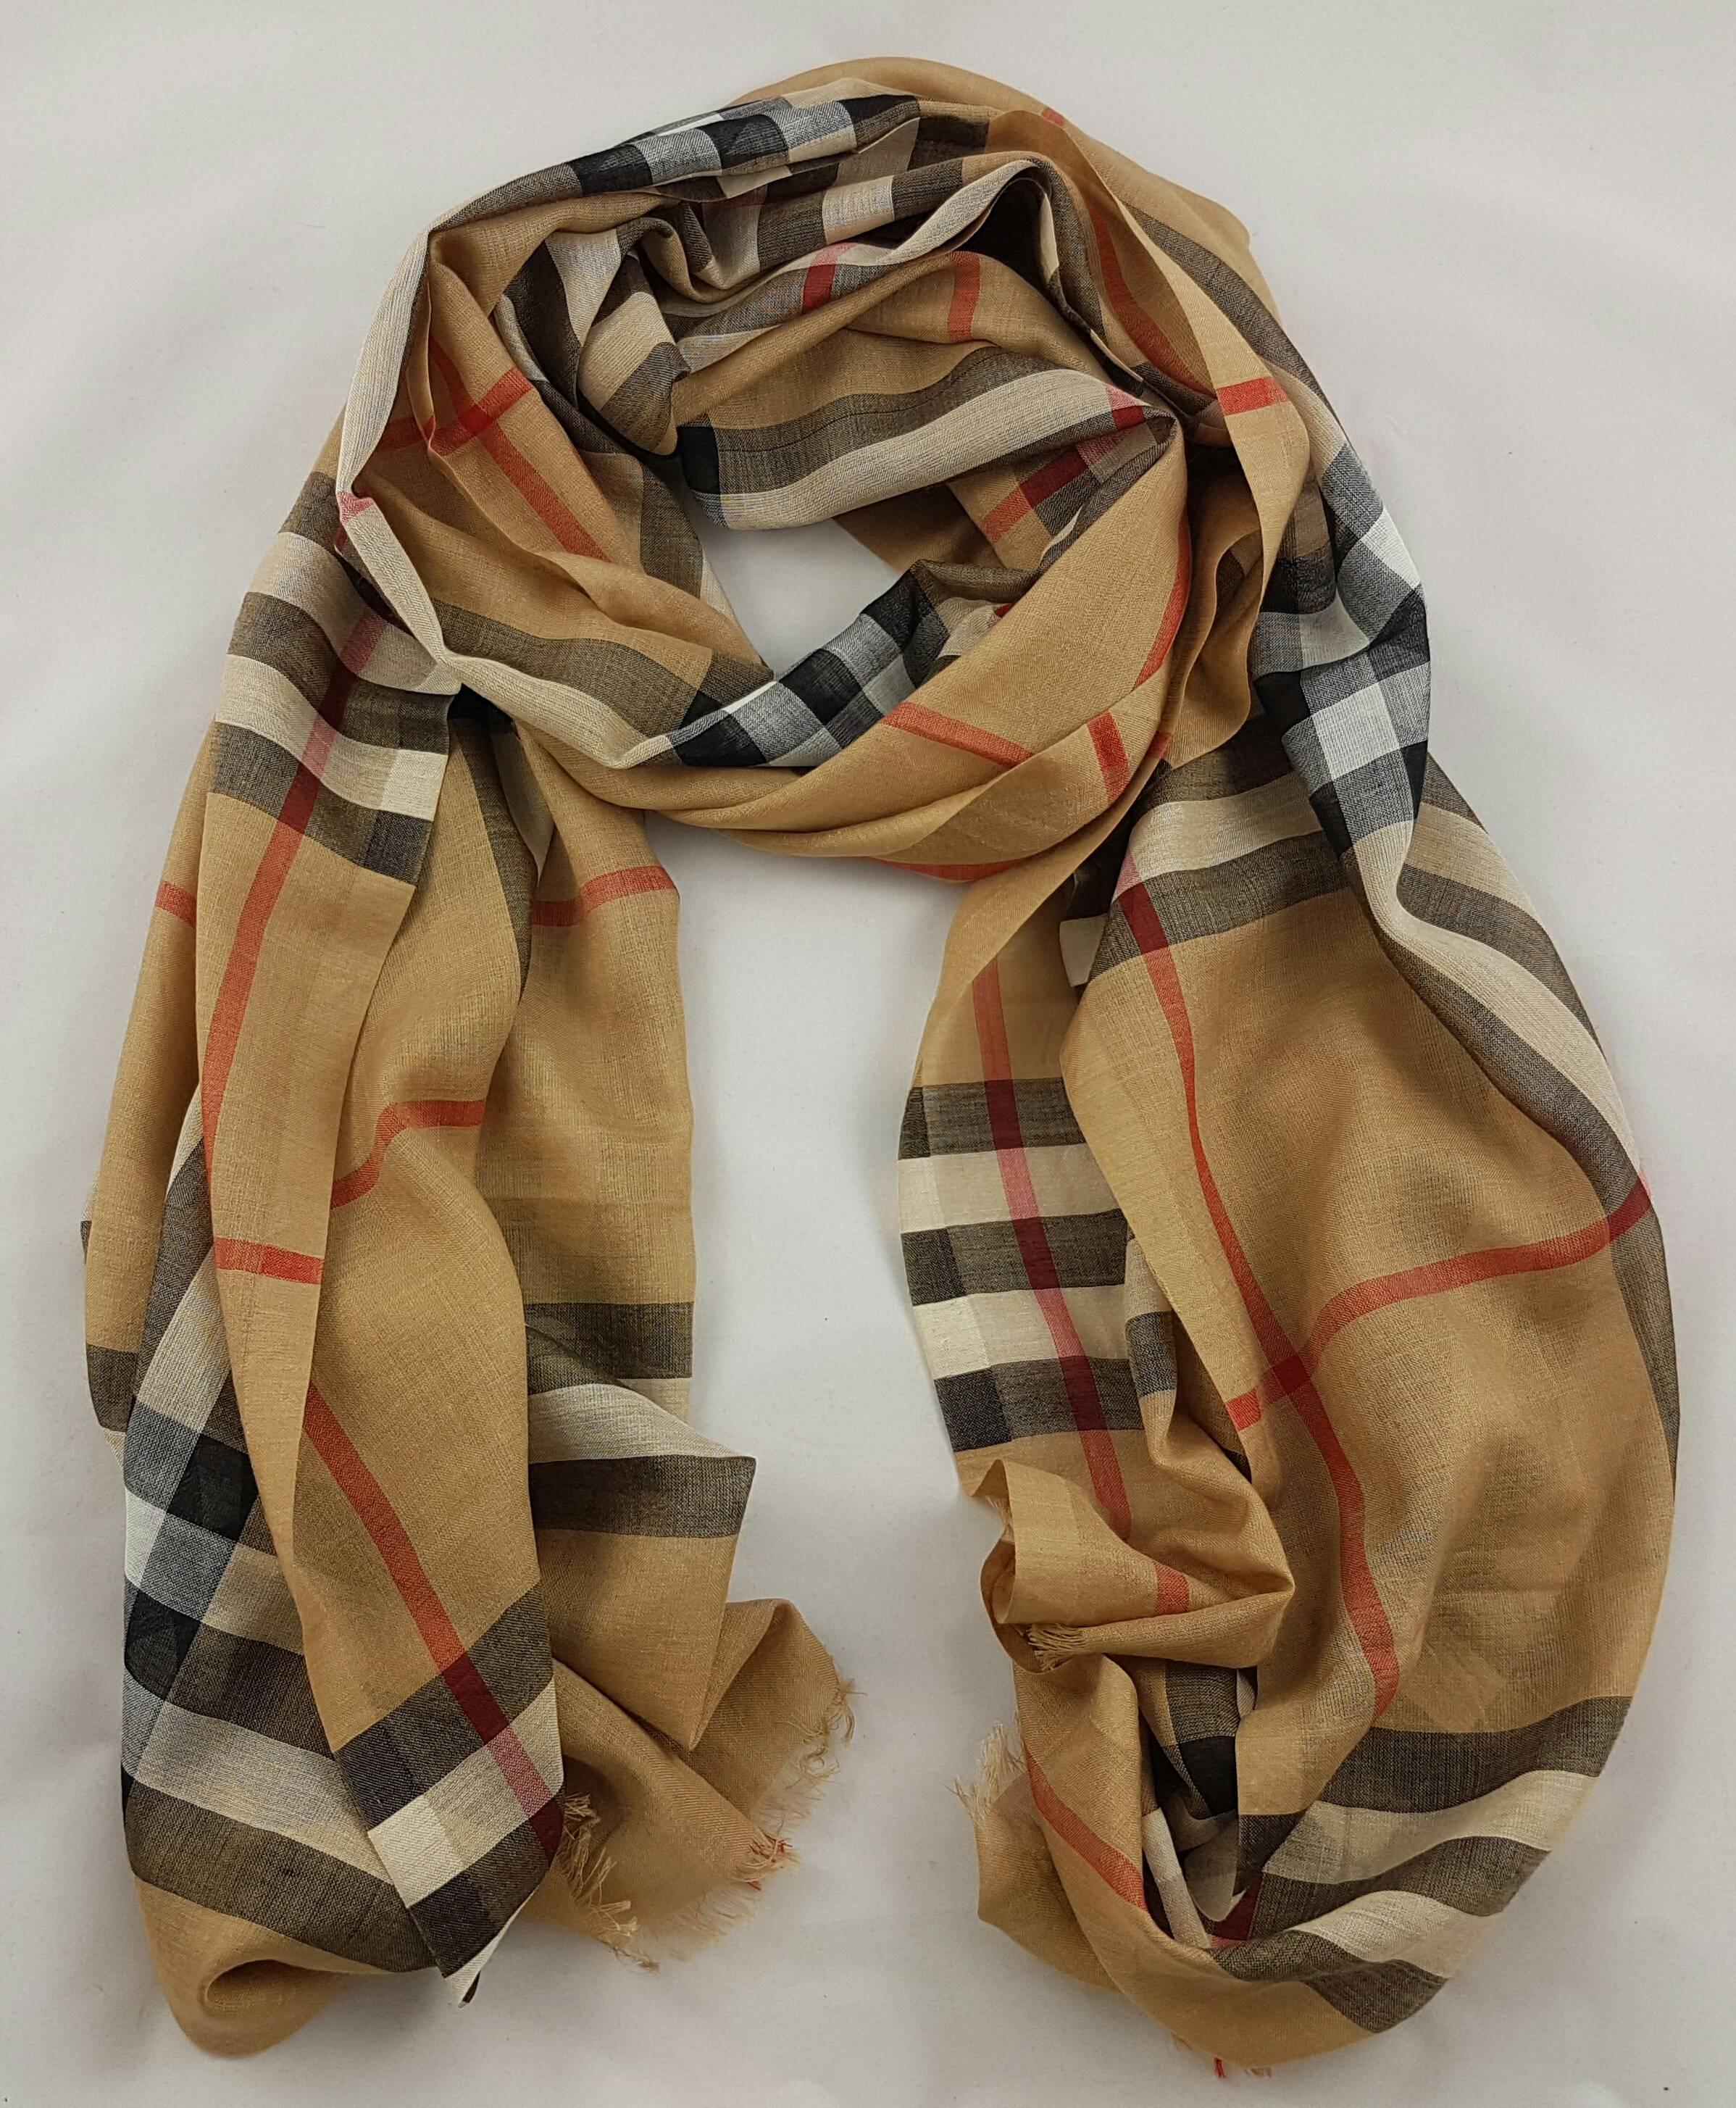 Burberry Stole, Camel

Burberry Lightweight Check Wool and Silk Scarf
Ash Rose Colour. Made in Italy
51% wool and 49% silk
Eyelash fringing at both ends
This gorgeous shawl is still in perfect condition.

Width 220 cm, Height 70 cm (86.61